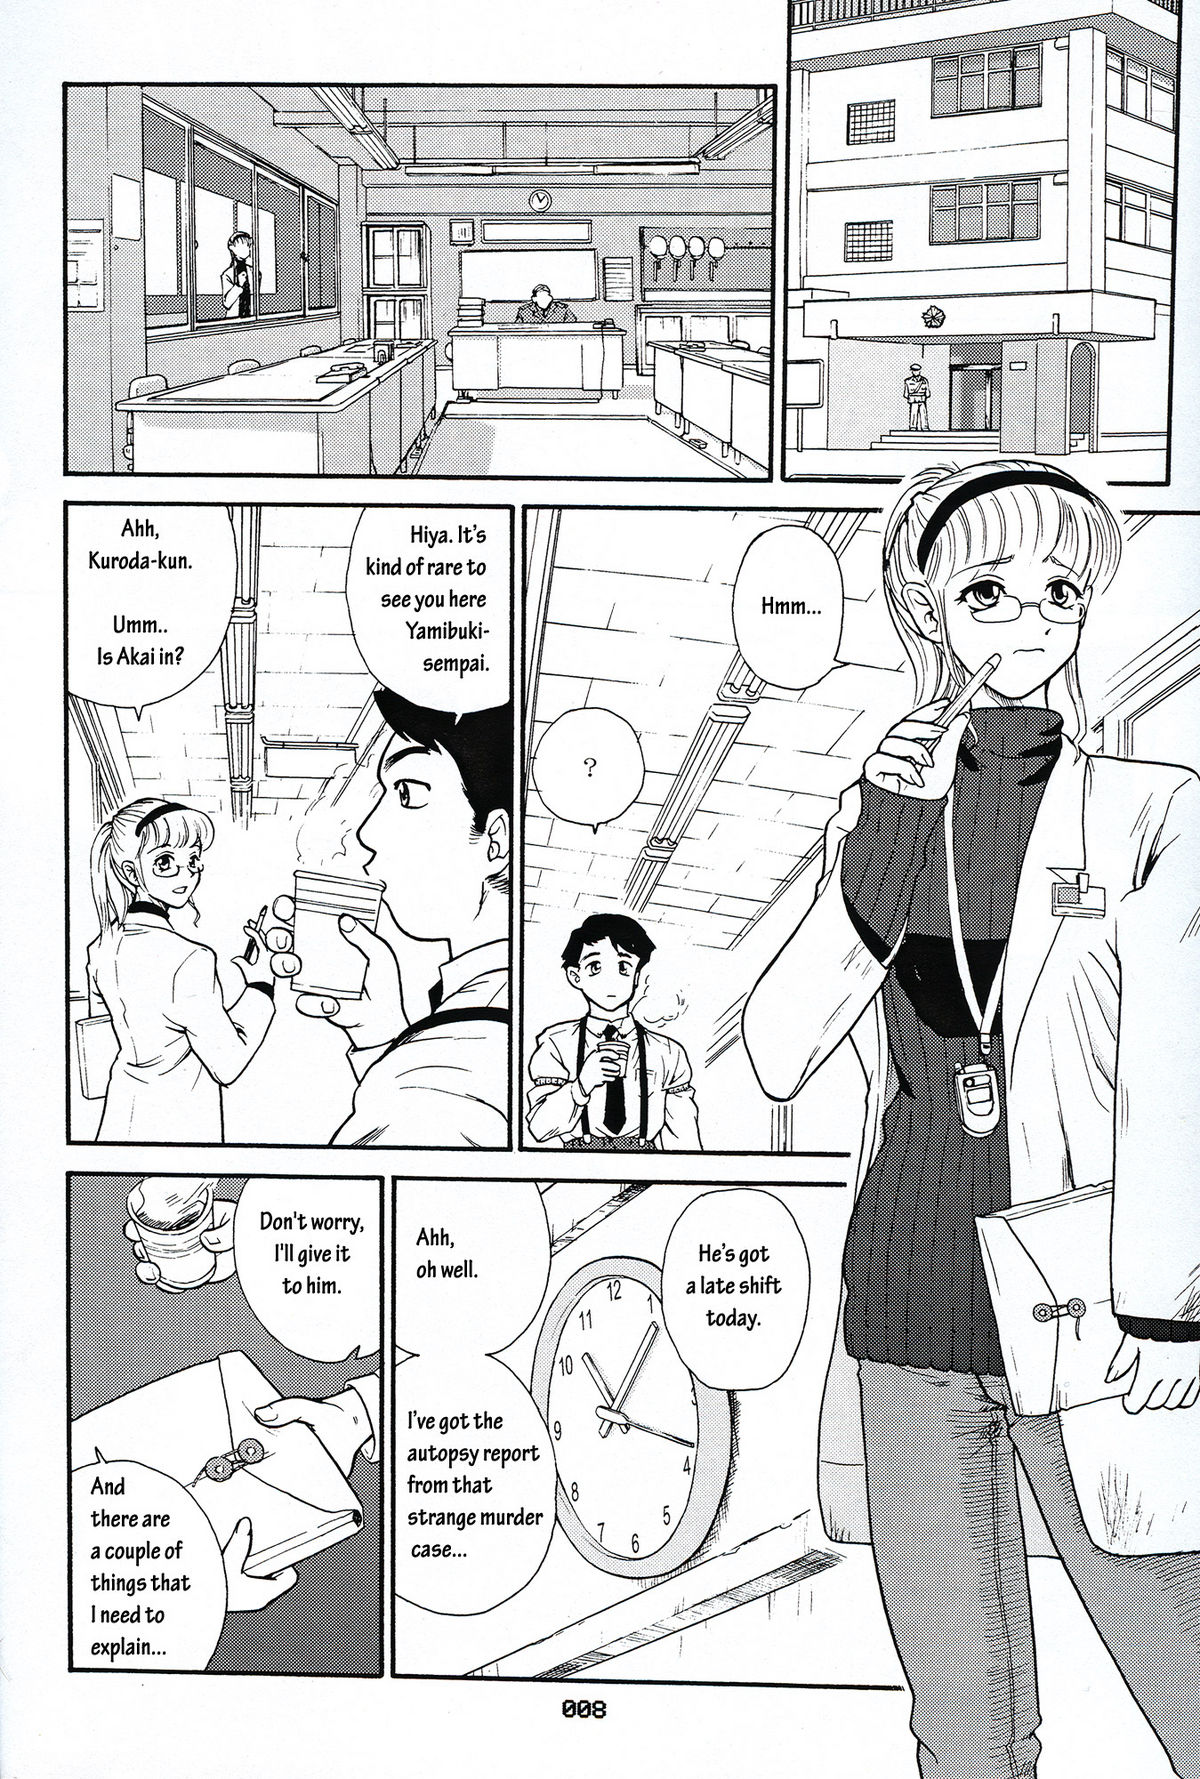 (SC19) [Behind Moon (Q)] Dulce Report 3 [English] page 7 full